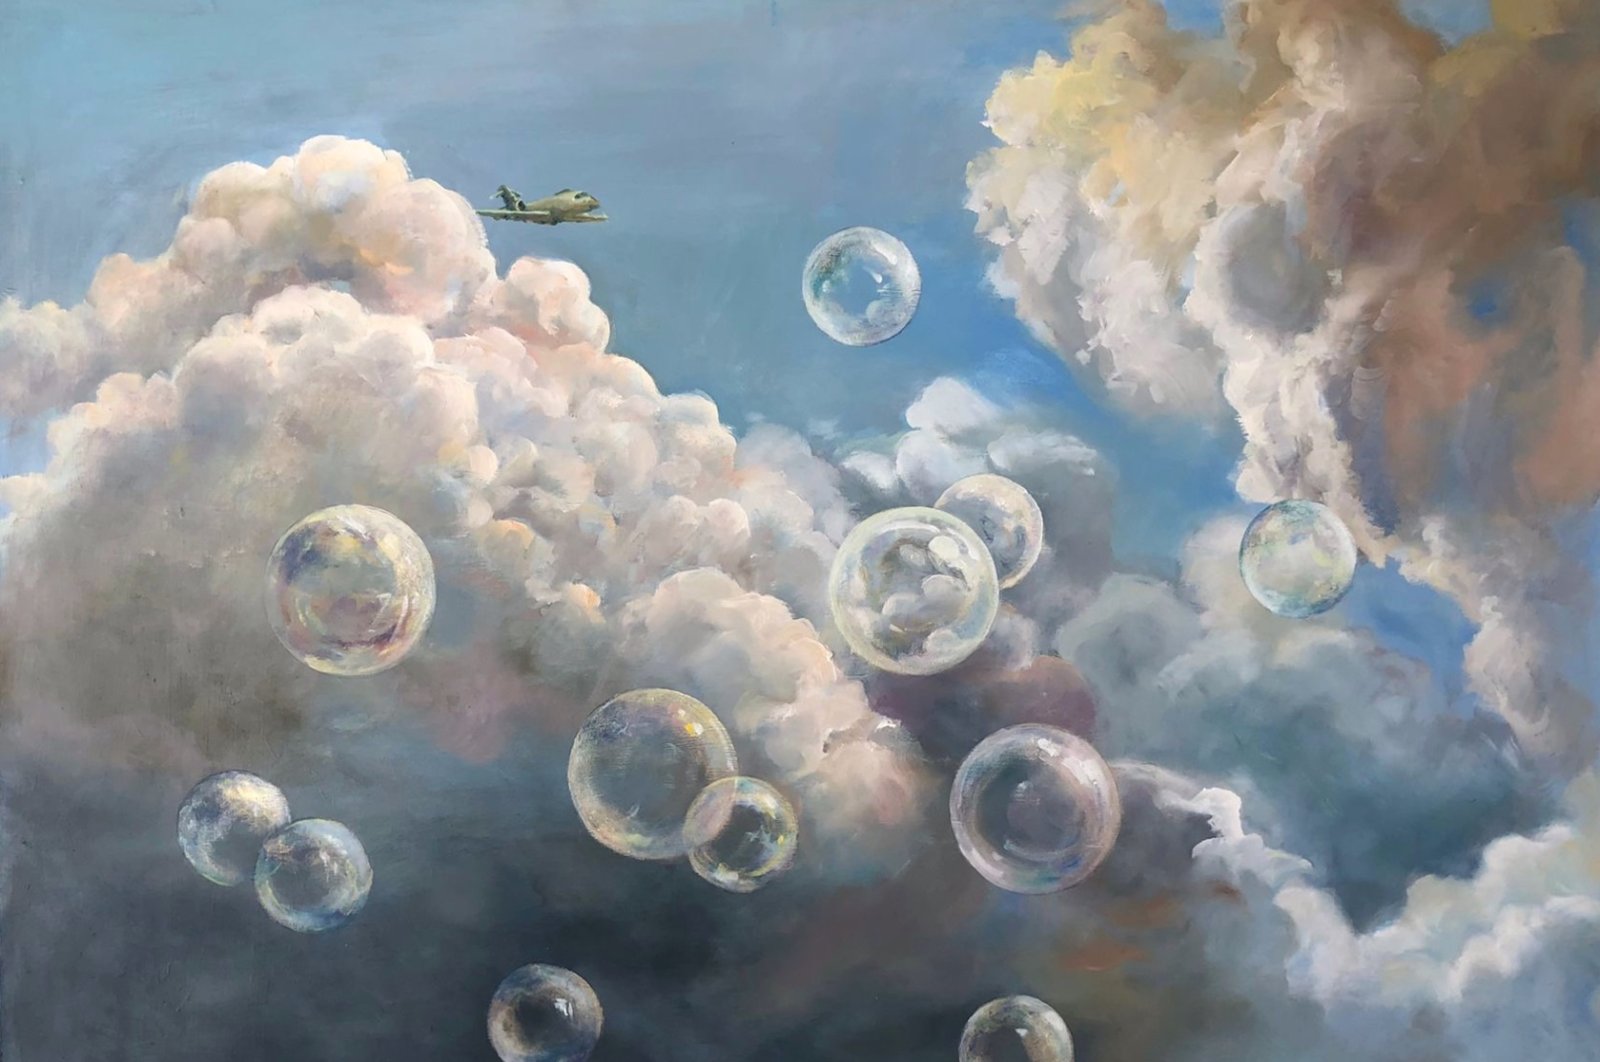 Alla Güner, "Close the sky," mixed technique, 105 by 78 centimeters, 2022. 